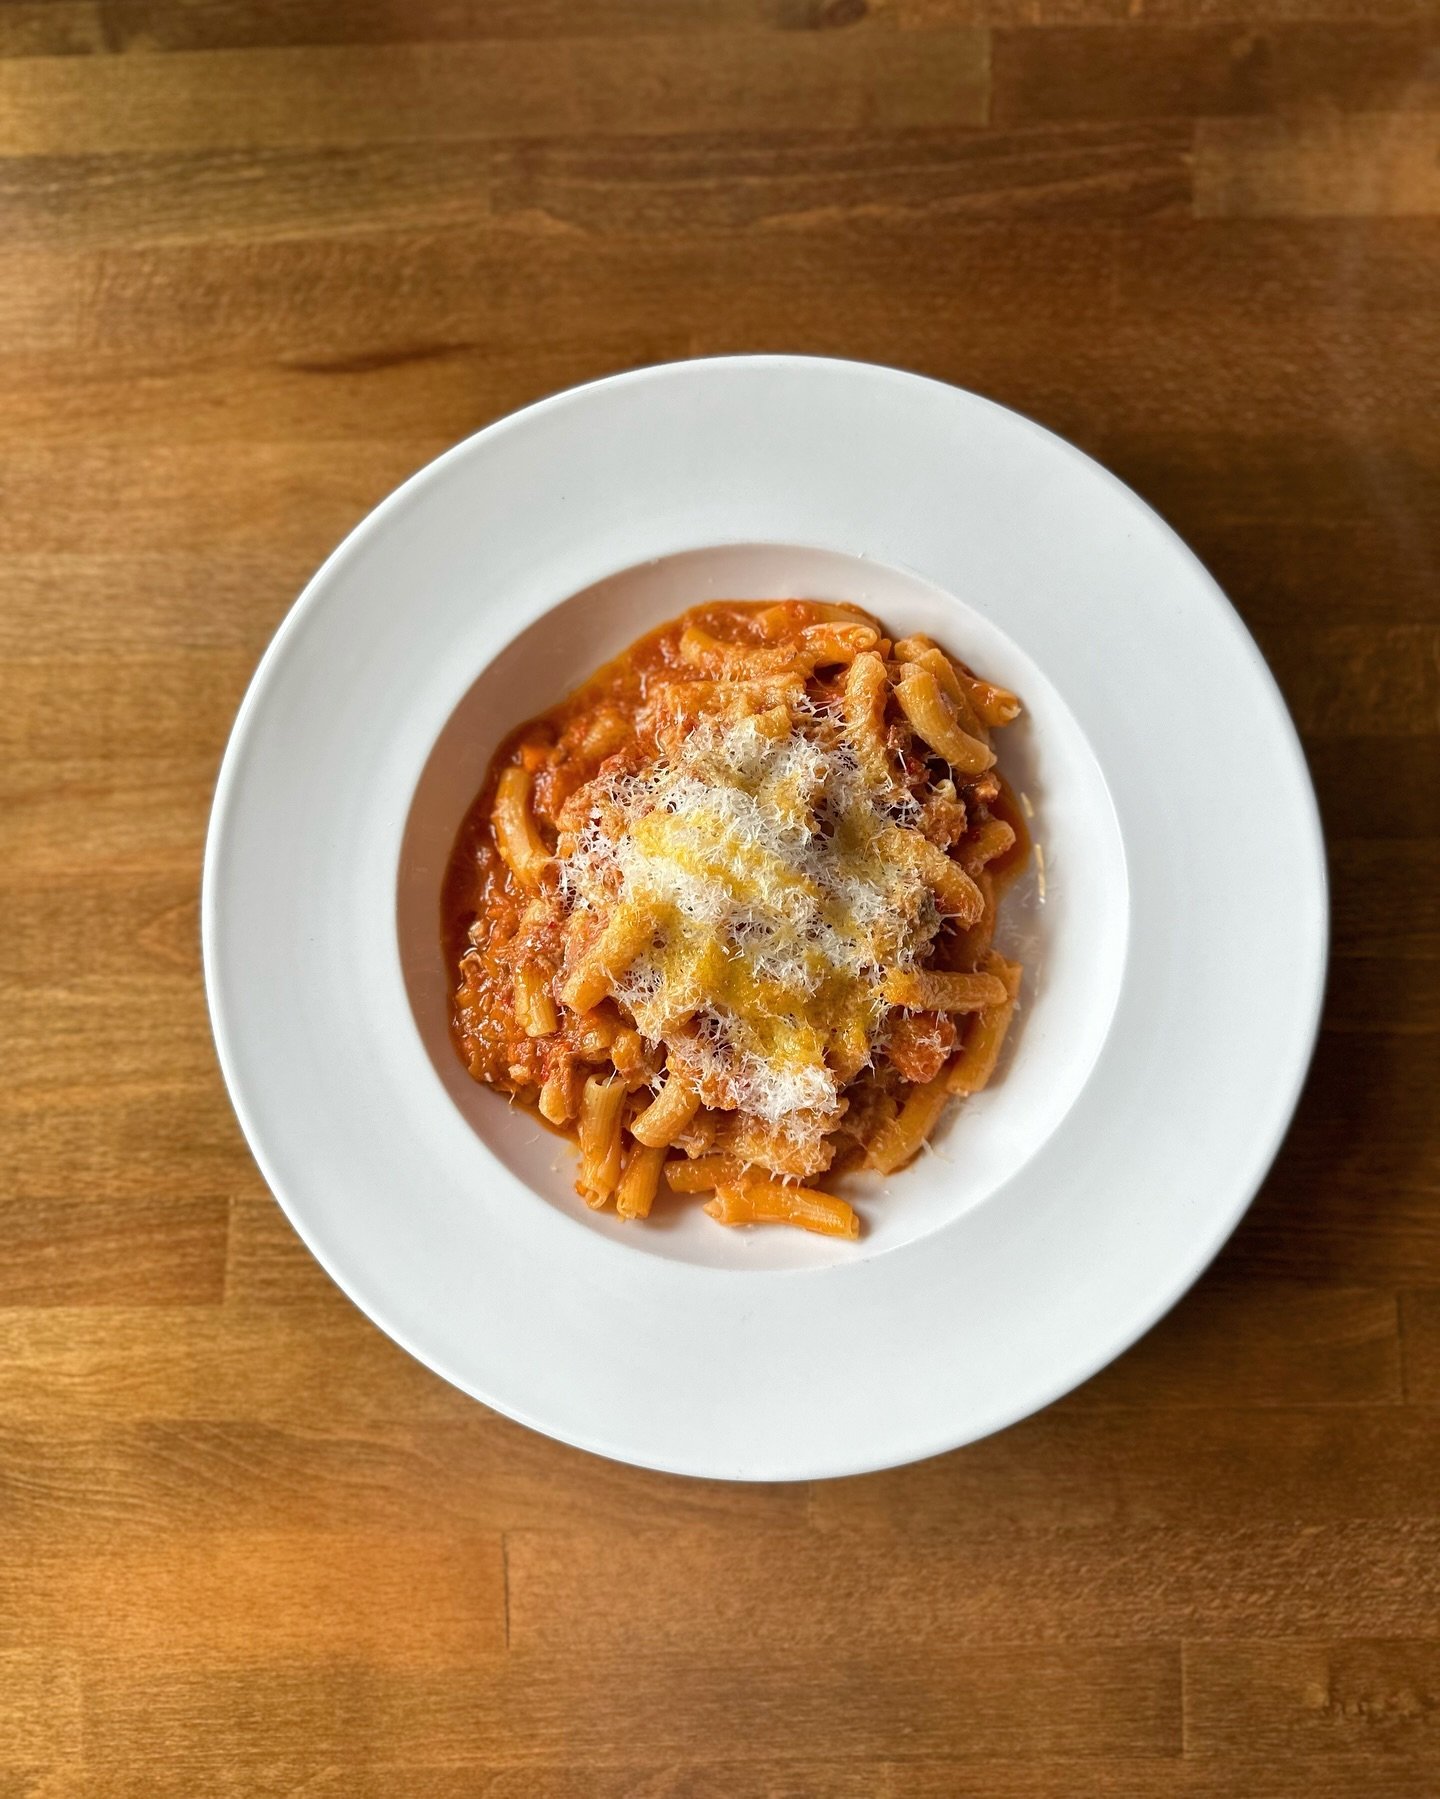 Fiorentini + Spicy Pork Sugo.

One of our favorite rainy day pastas. Pork shoulder simmered all day white wine, tomato, Calabrian chili + aromatic vegetables. Available Dine-in or Carryout. 

Walk ins welcome tonight!

Dinner starts at 5:00, we&rsquo